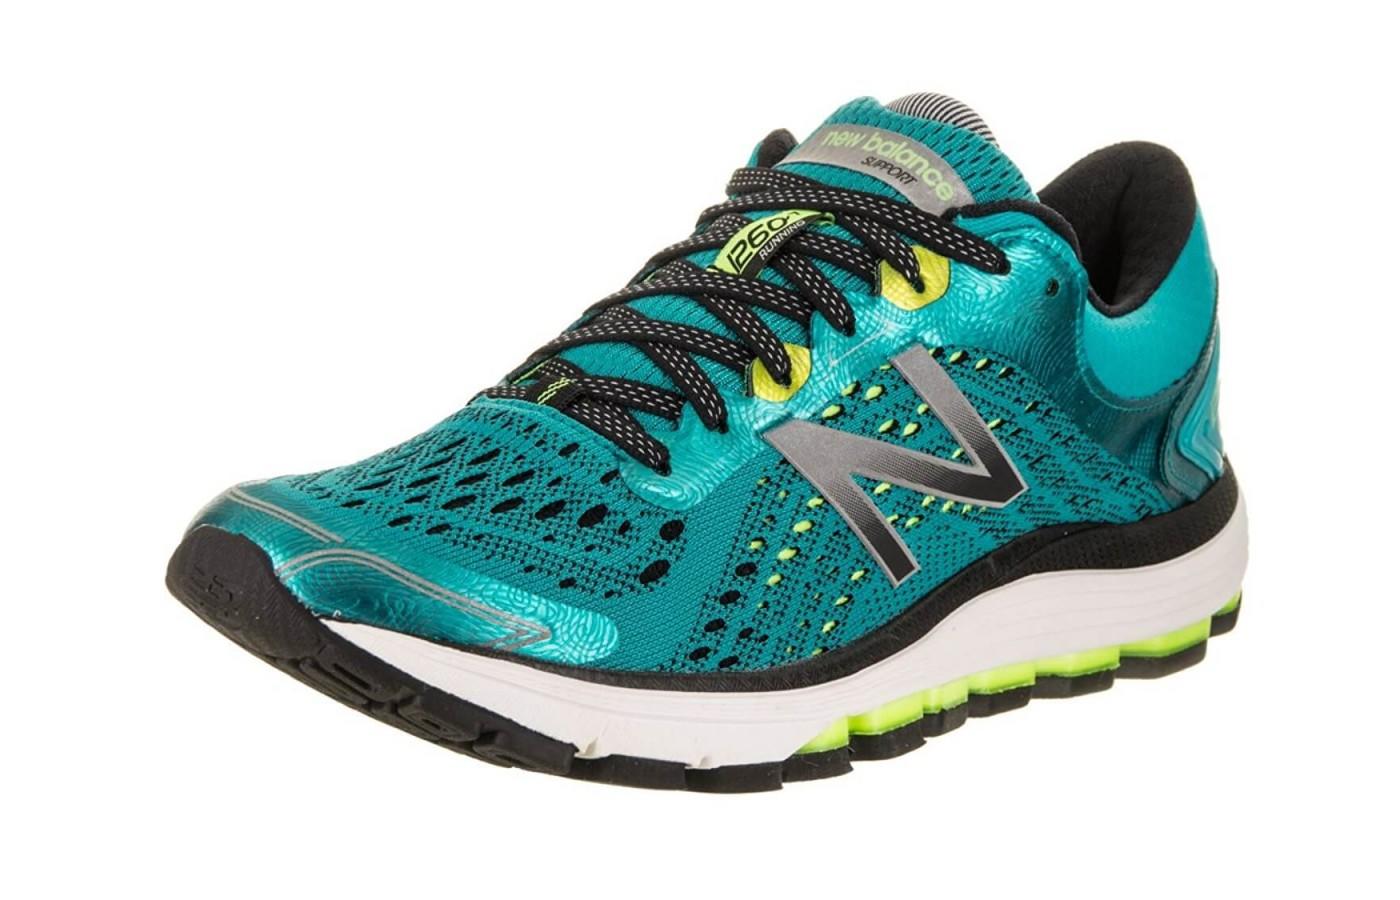 The New Balance 1260 V7 offers stability support for runners. 